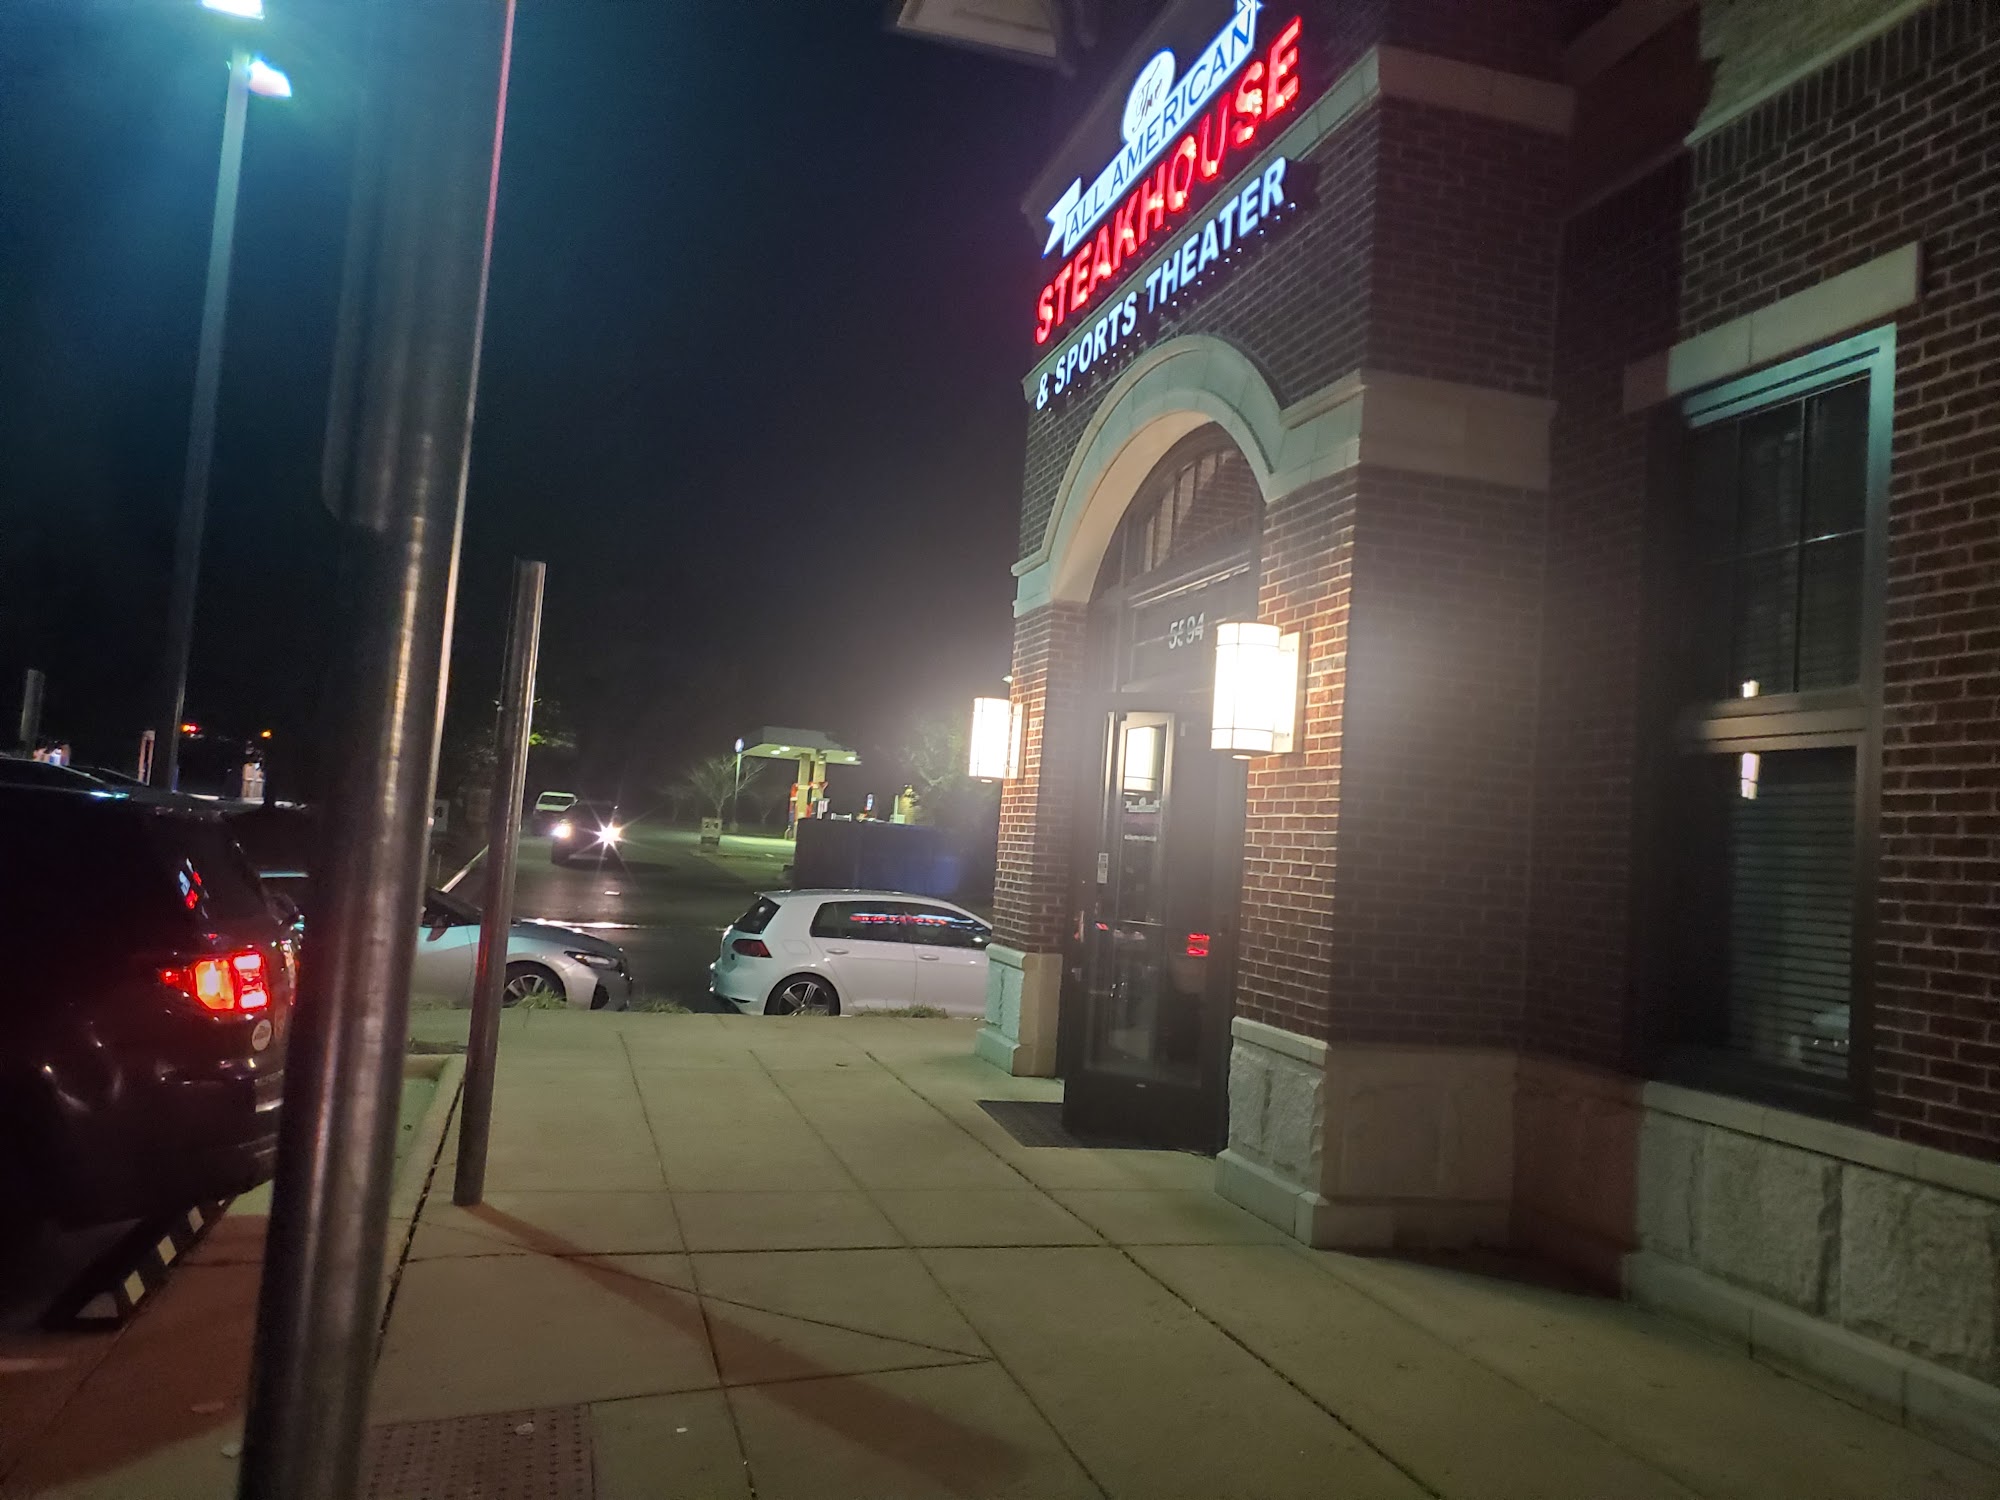 The All American Steakhouse & Sports Theater Manassas